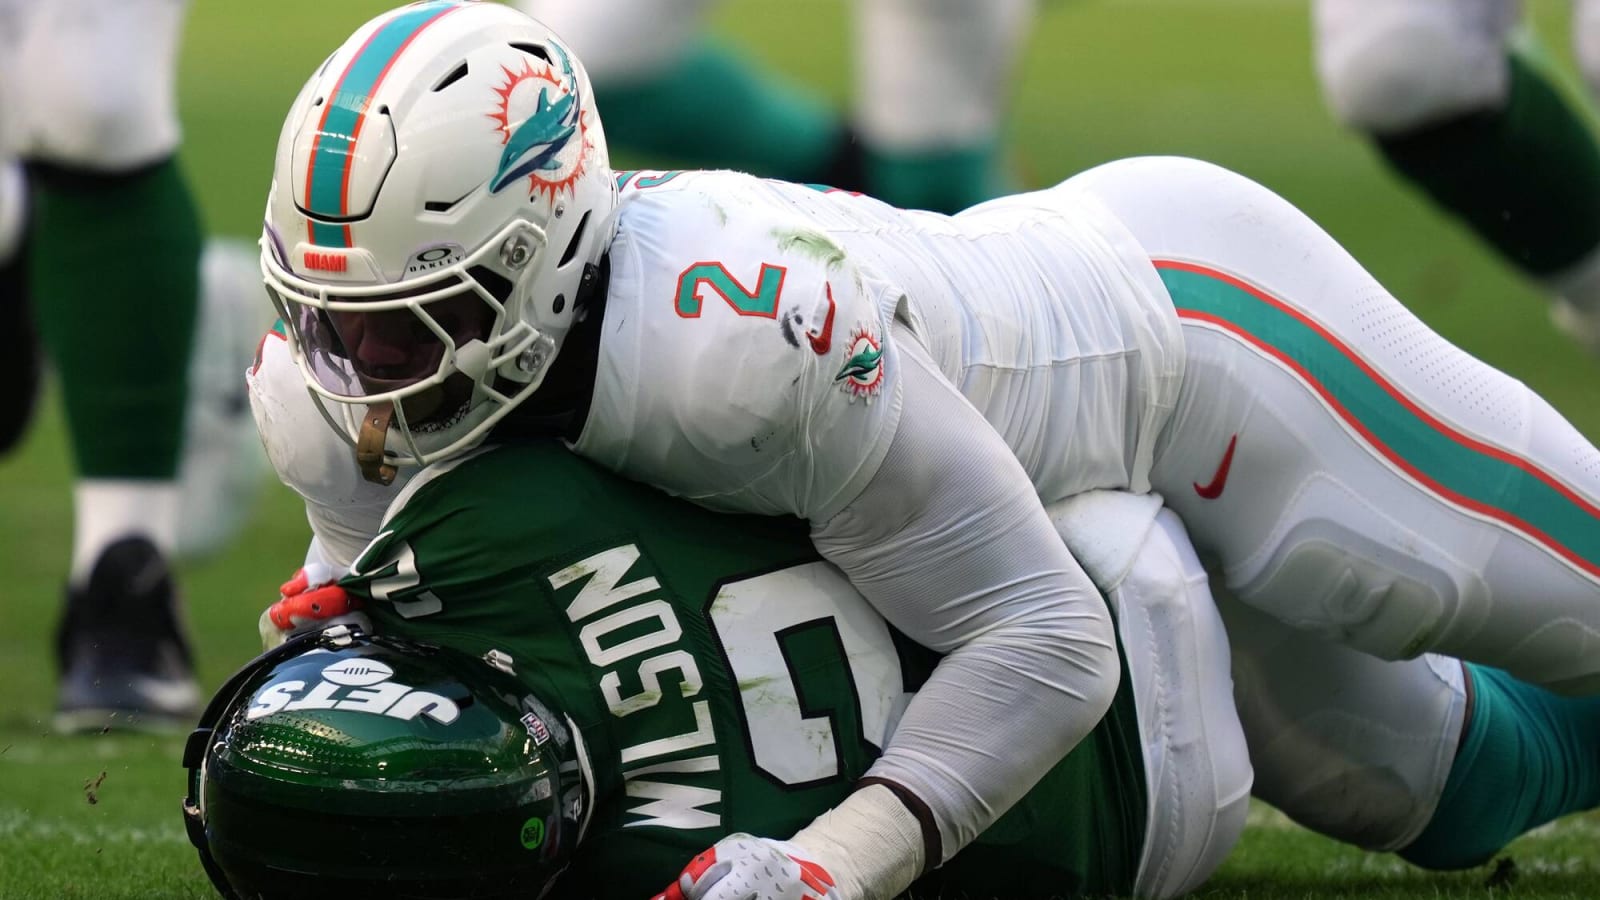 Miami’s Defense Continues to Trend in the Right Direction After Breaking Franchise Sack Record